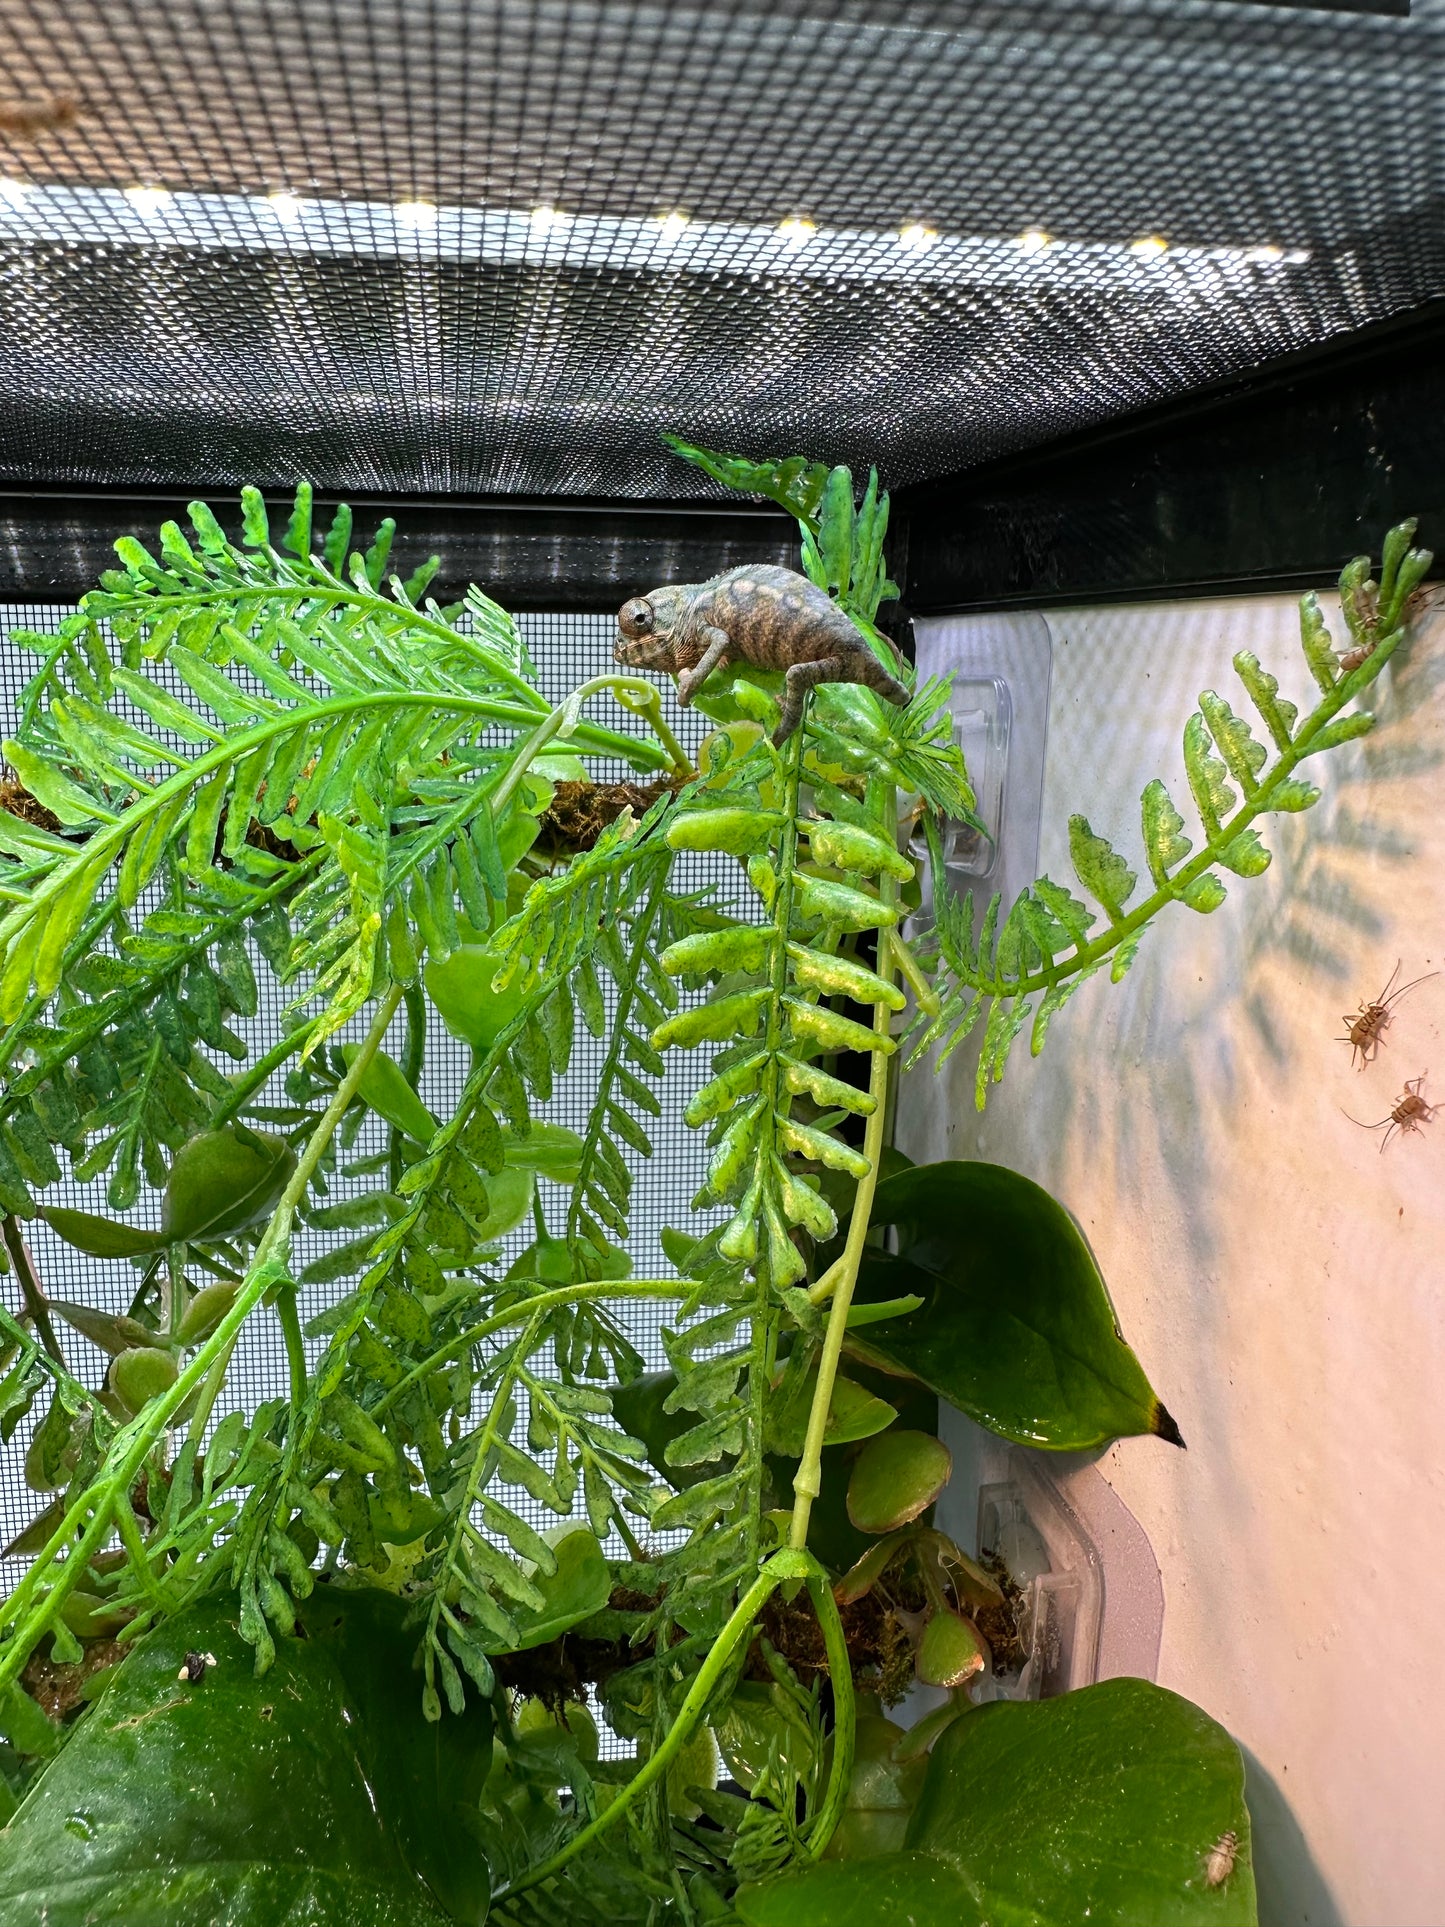 Male Nosy and SLB -  Baby Chameleon with All-In-One Automated Habitat kit